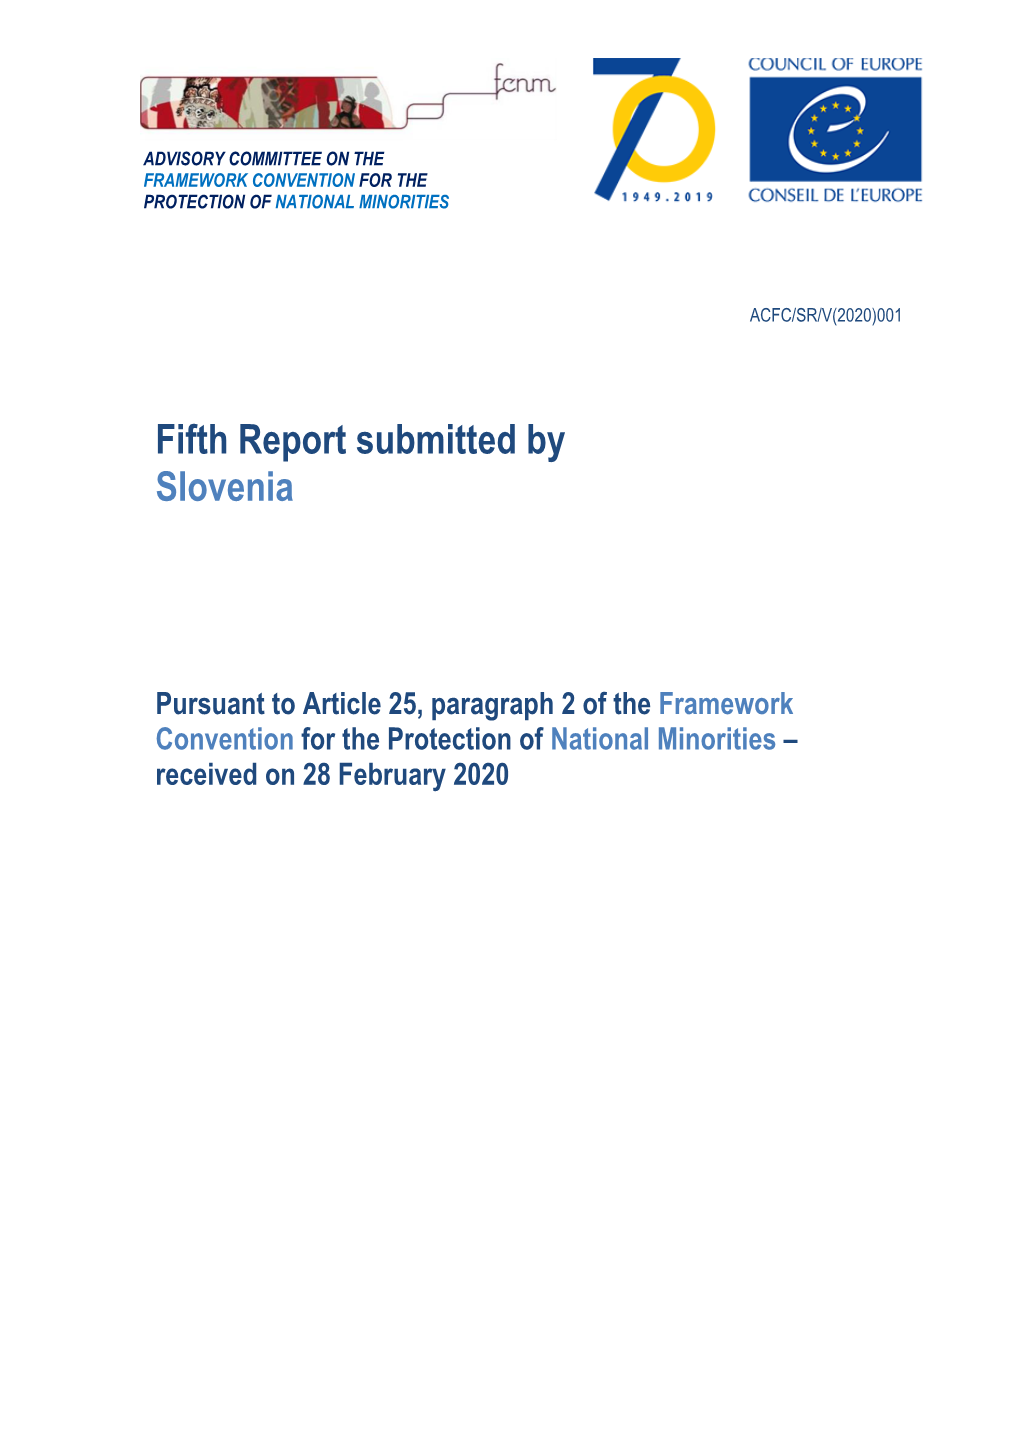 Fifth Report Submitted by Slovenia